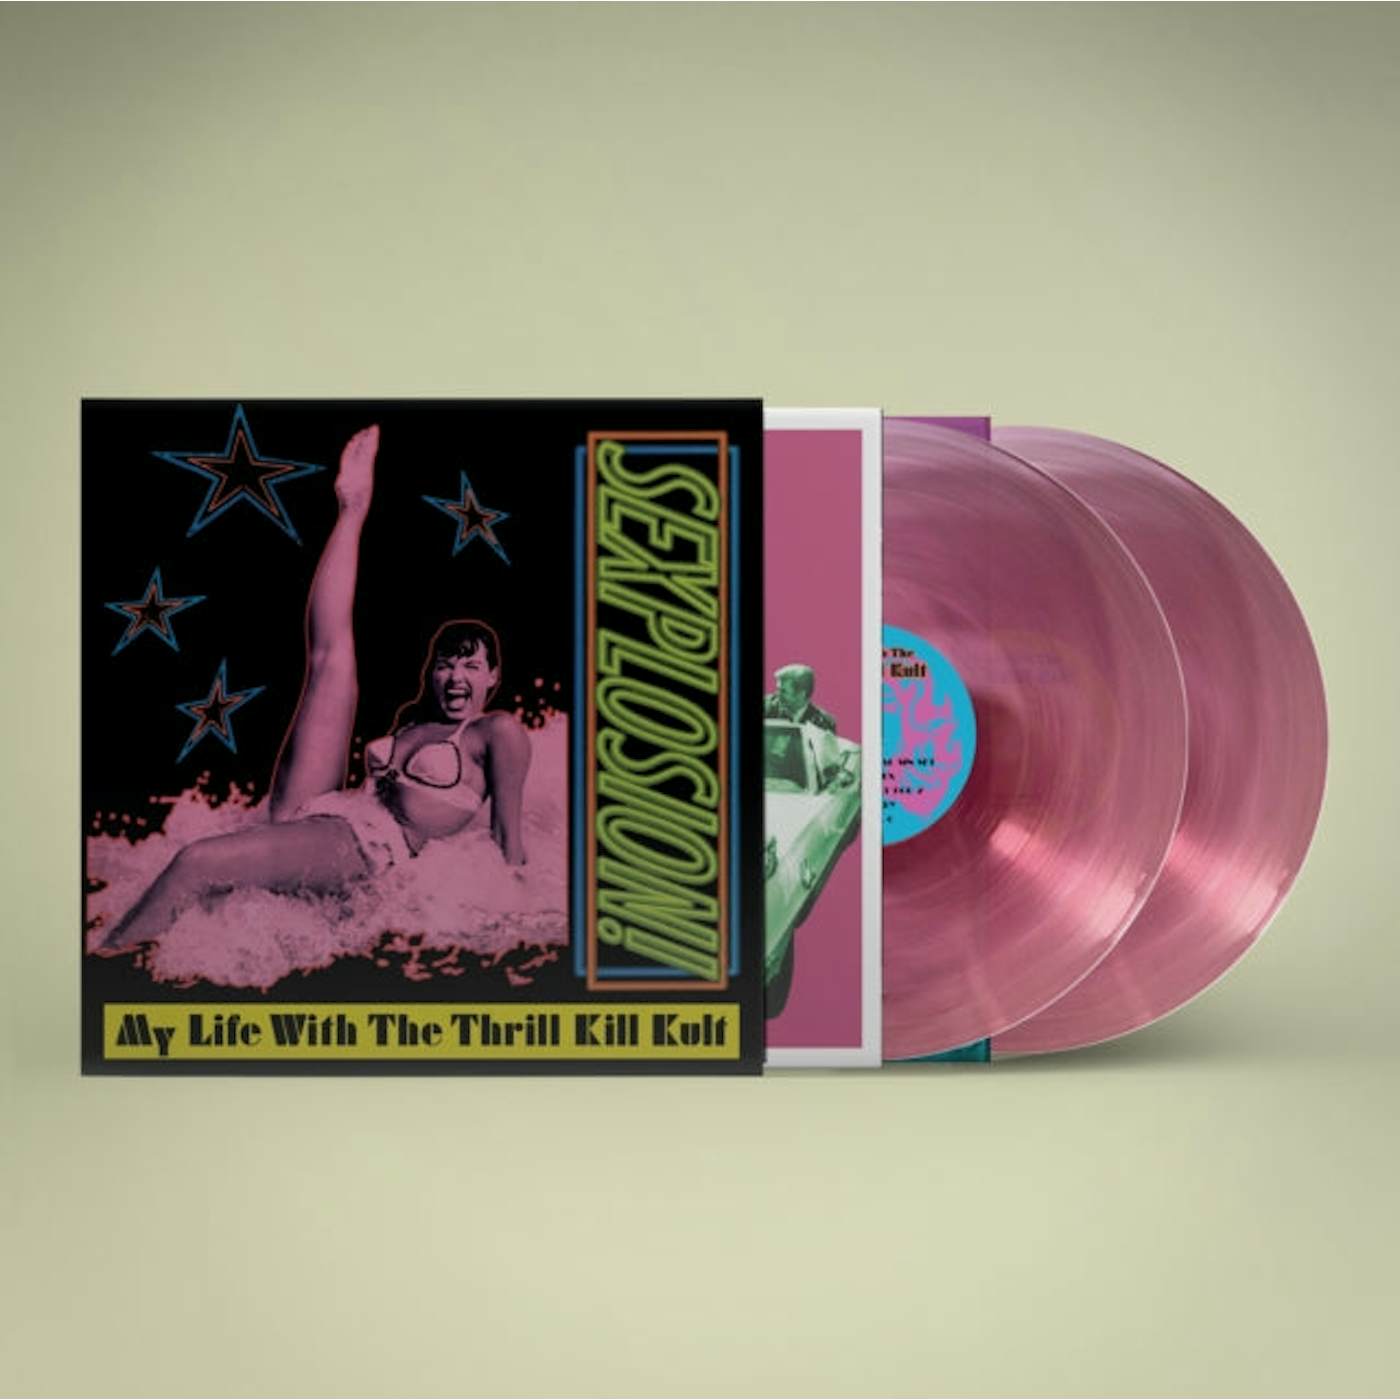 My Life With The Thrill Kill Kult LP - Sexplosion! (Pink Vinyl)